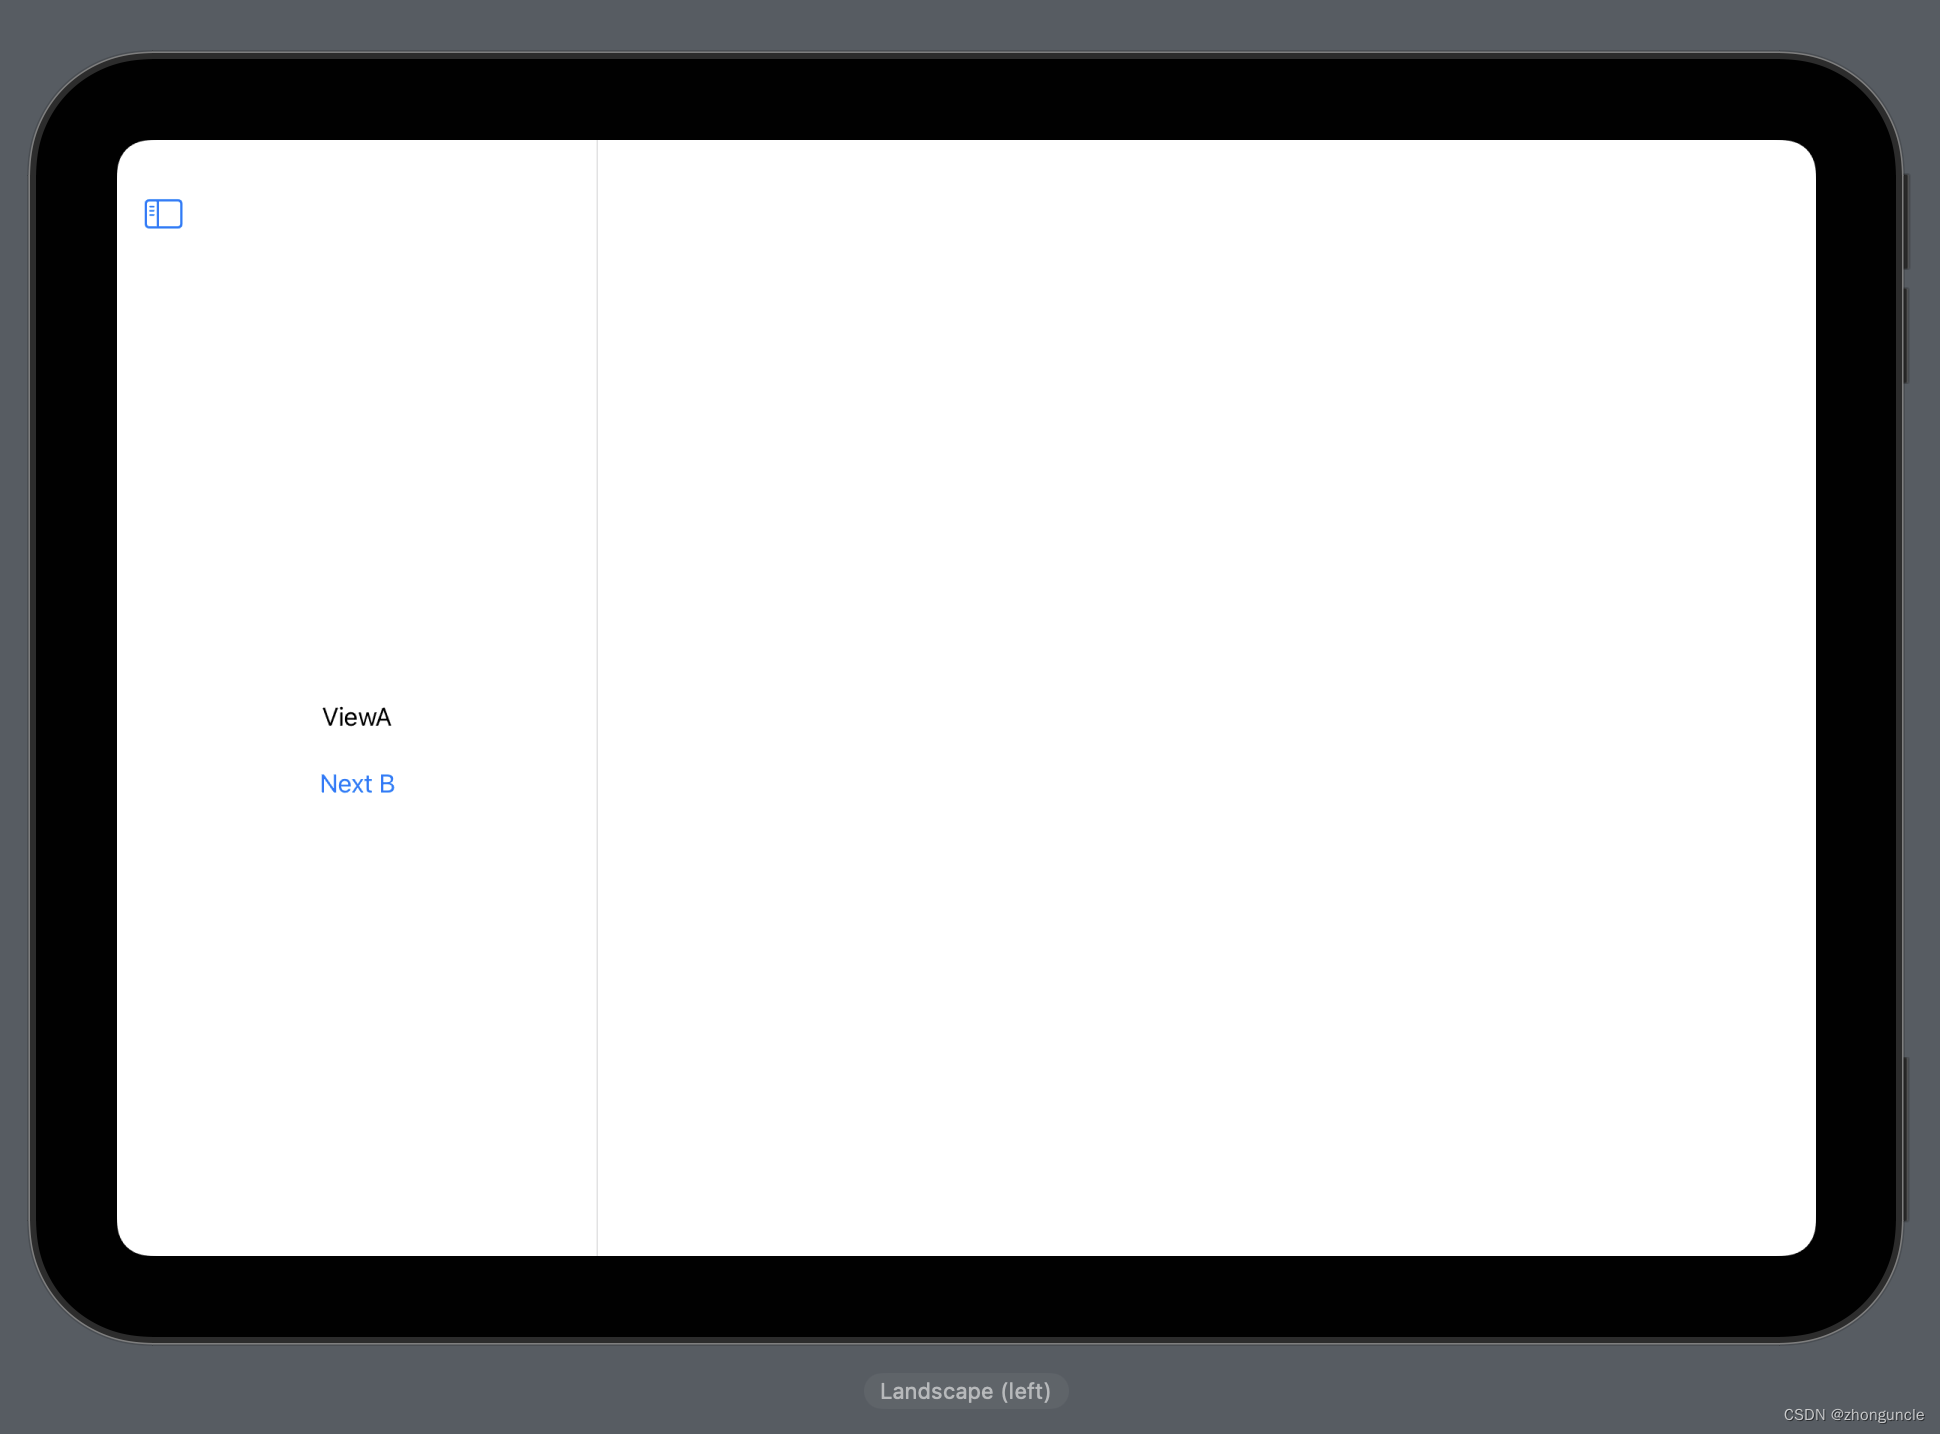 Recently, when using `NavigationView` on iPadOS, the content will be placed in the sidebar, instead of like iOS or before